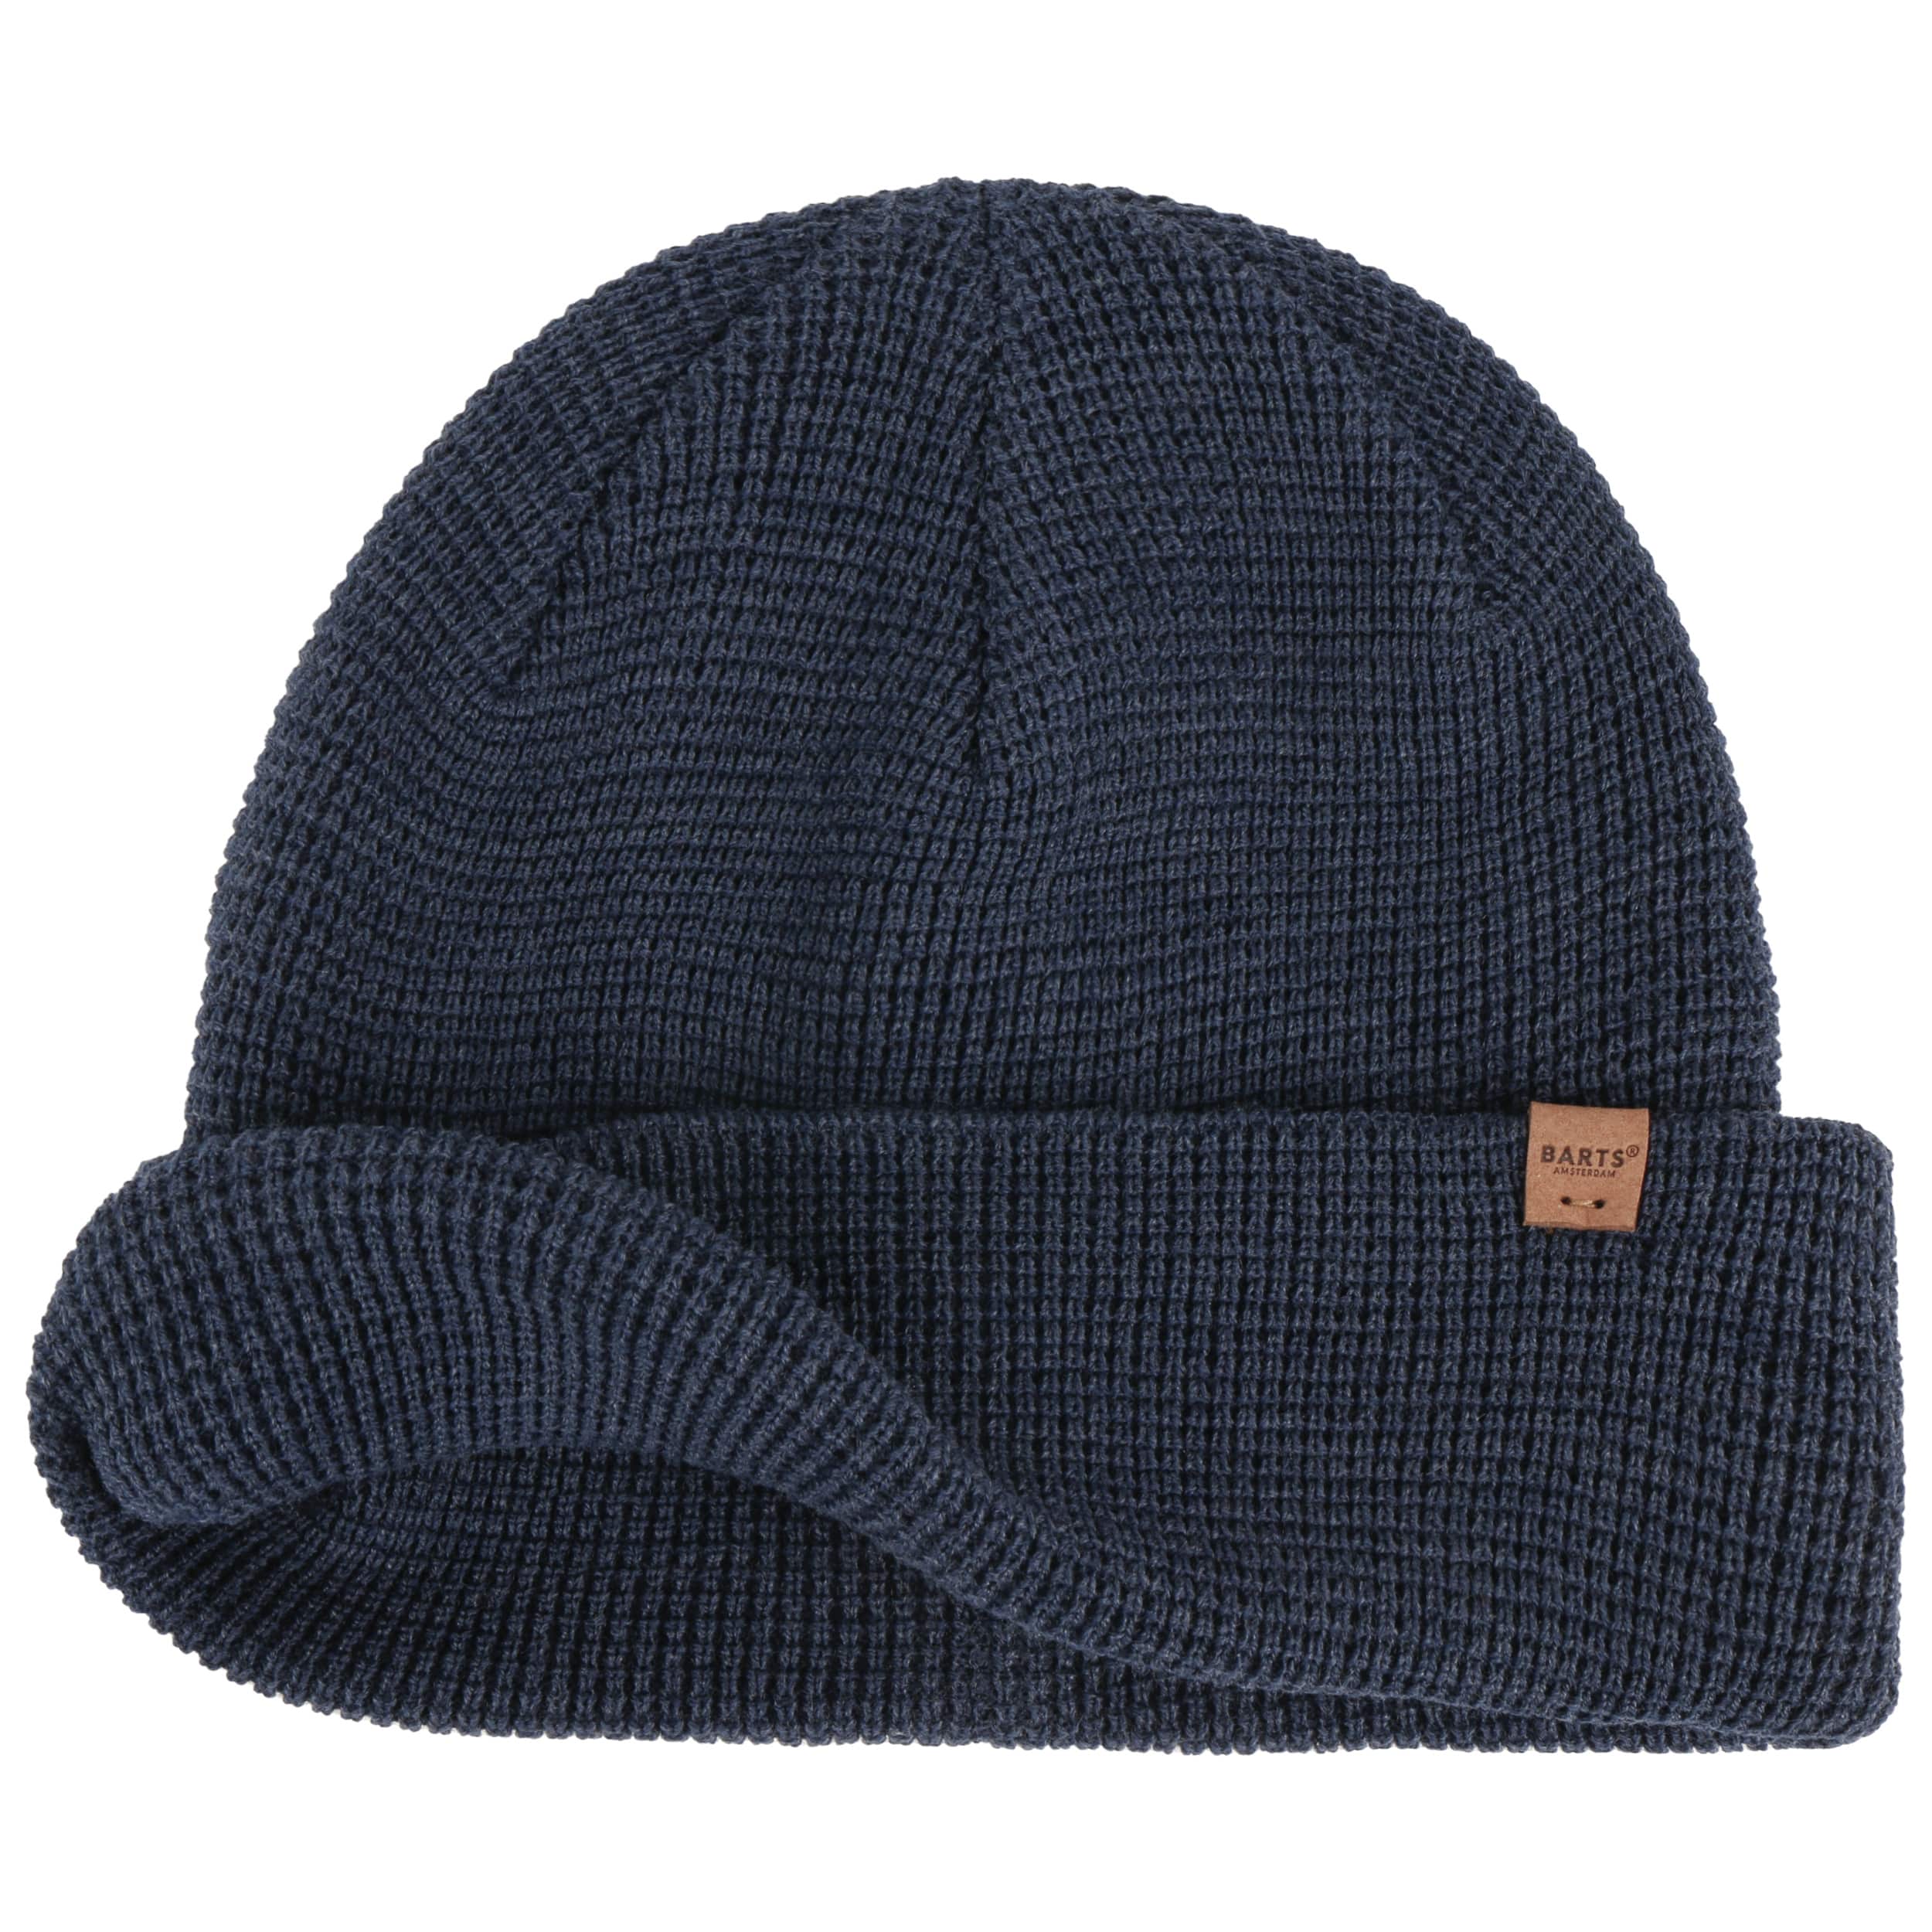 Coler Beanie - Hat Barts by 22,95 £